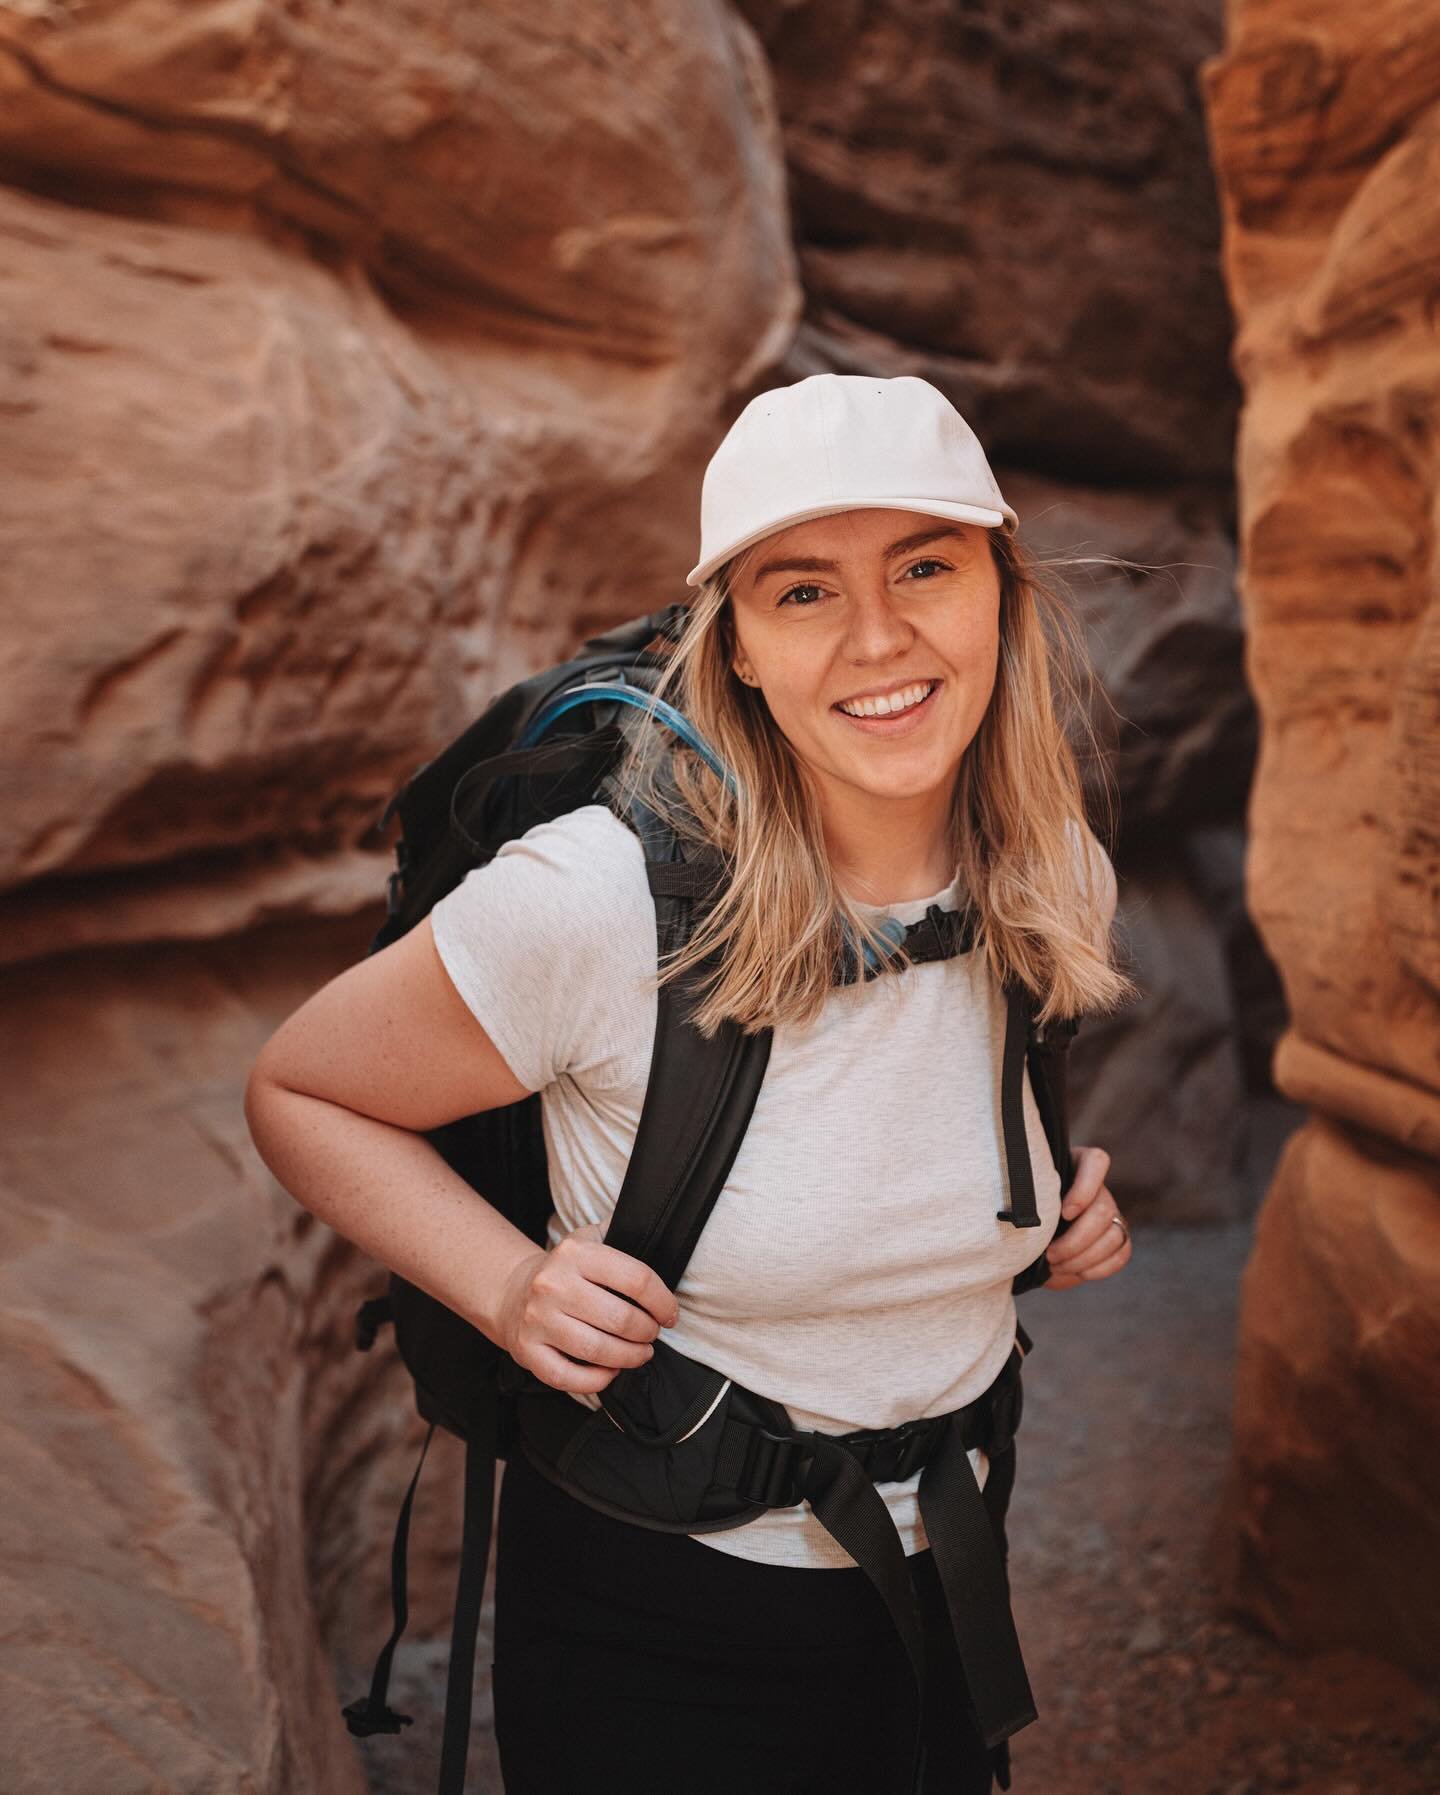 I always have time to slot in a slot canyon 🏜️ highly recommend visiting the Valley of Fire if you&rsquo;re in the Las Vegas area. It&rsquo;s only about an hour from the city, there&rsquo;s lots of cool scenery, and the hikes are all pretty short so